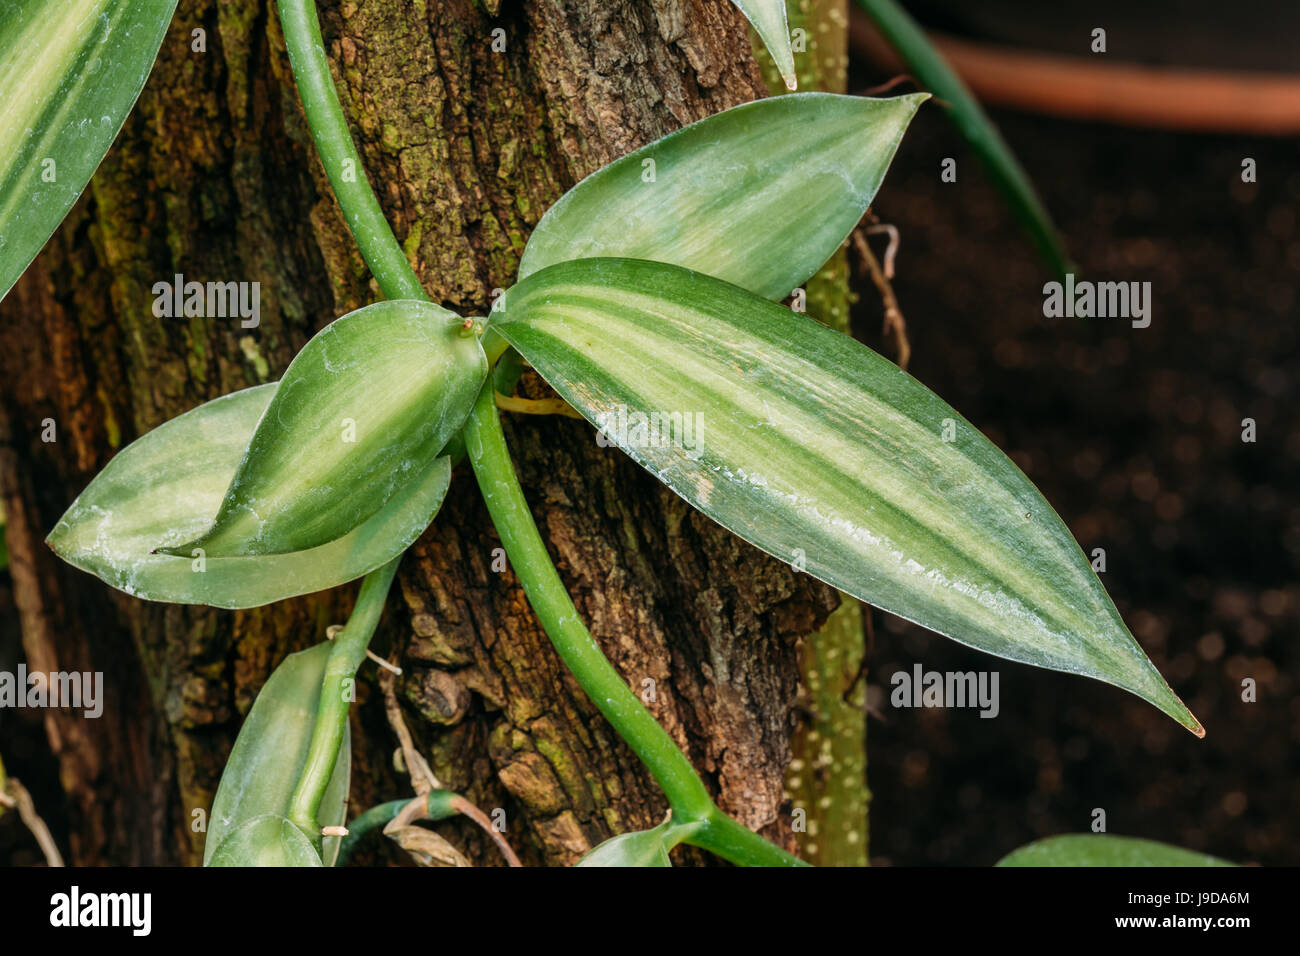 Green Leaves Of Plant Vanilla Planifolia Jacks Ex Andrews. It Is Native To Mexico And Central America, And Is One Of The Primary Sources For Vanilla F Stock Photo